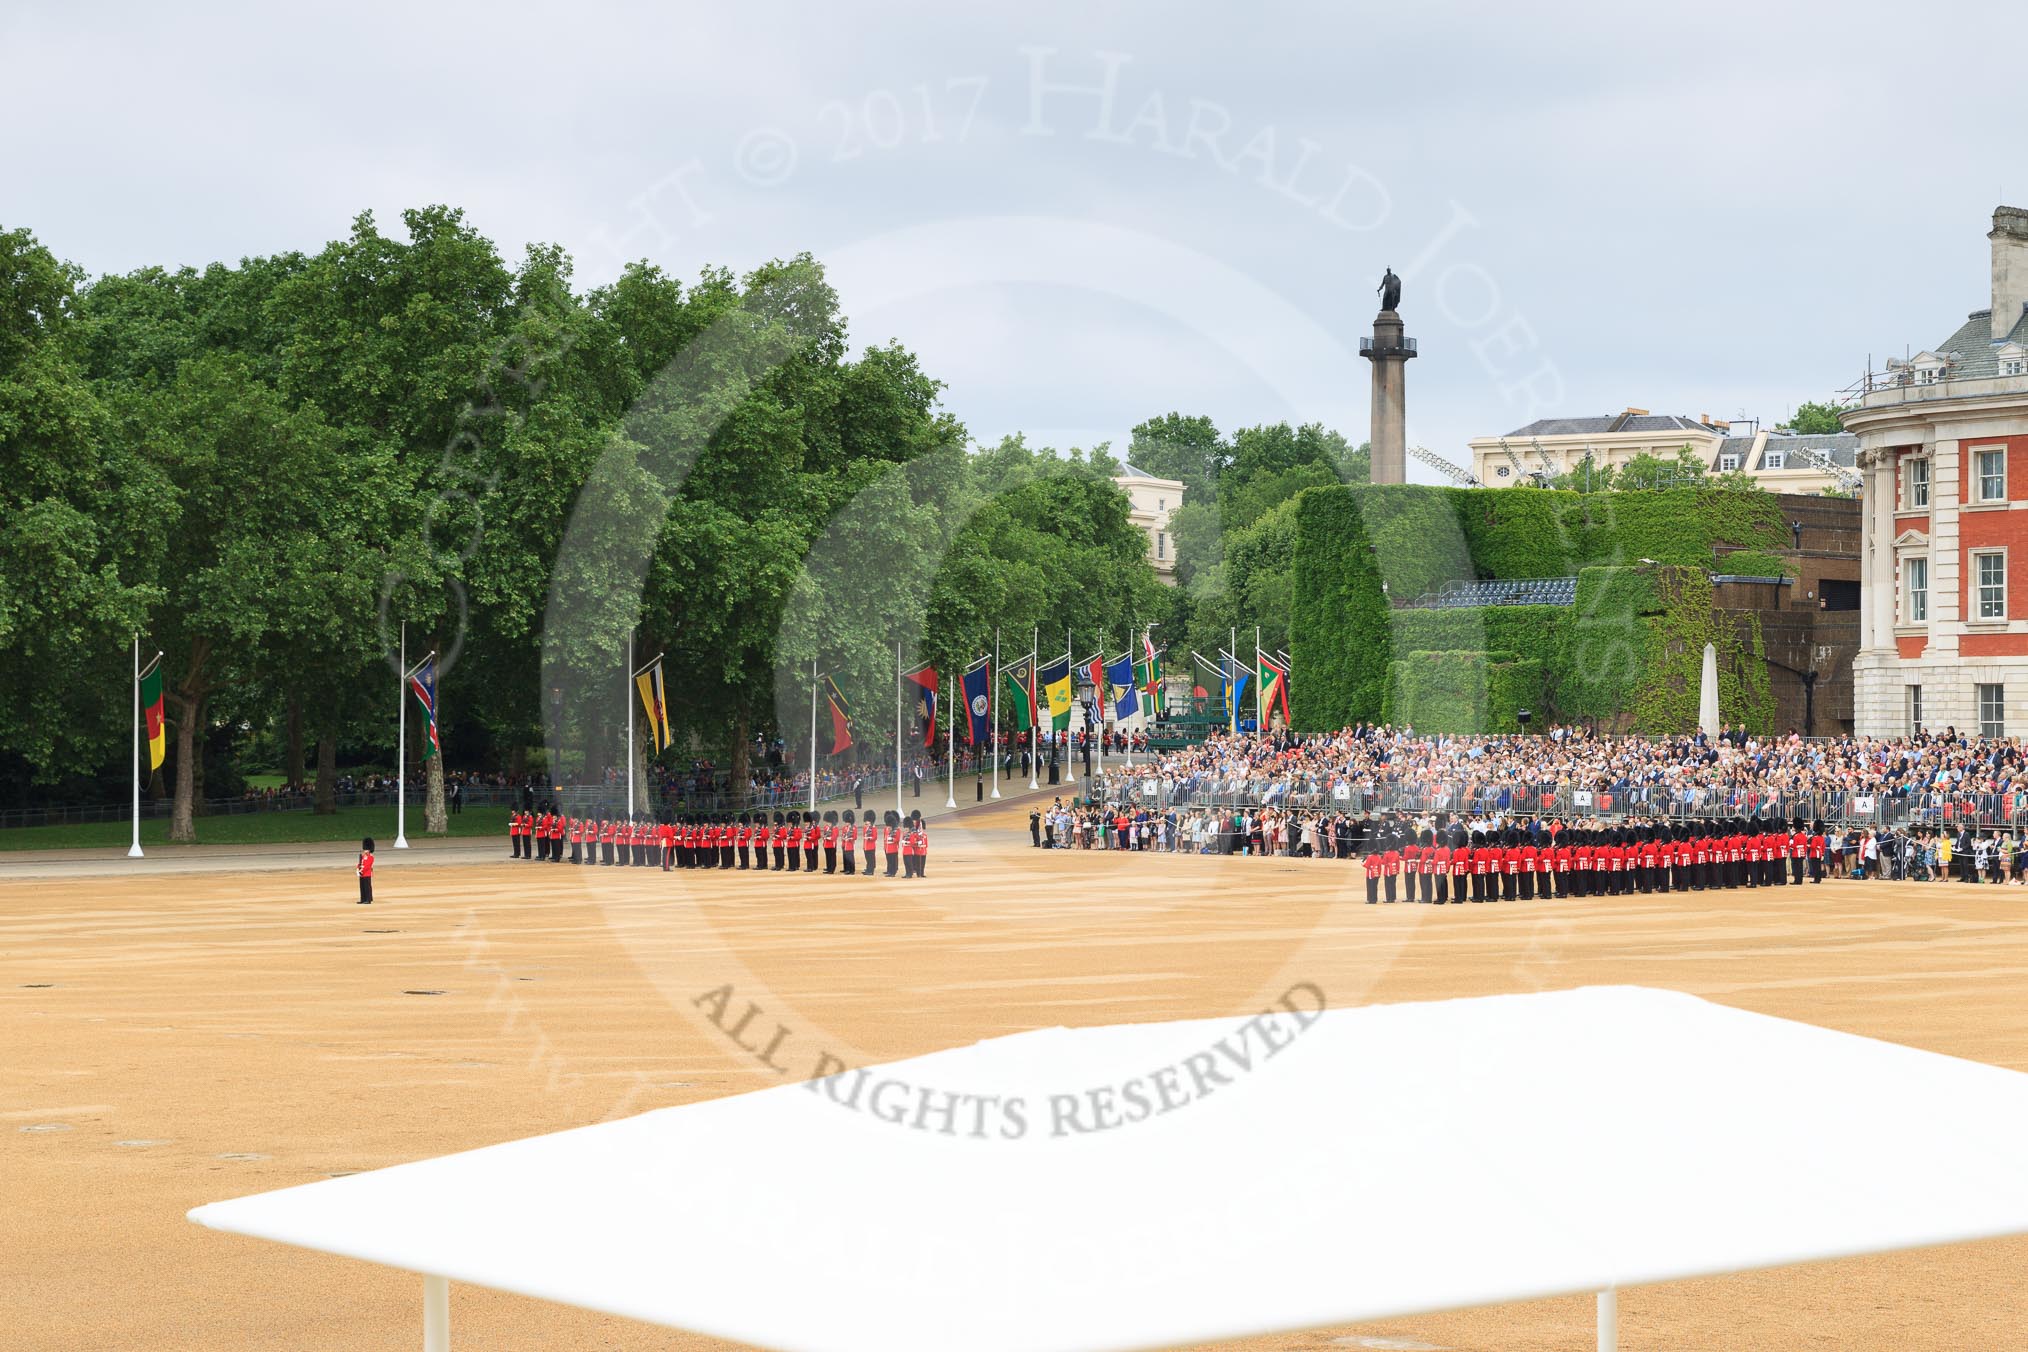 during The Colonel's Review {iptcyear4} (final rehearsal for Trooping the Colour, The Queen's Birthday Parade)  at Horse Guards Parade, Westminster, London, 2 June 2018, 10:26.